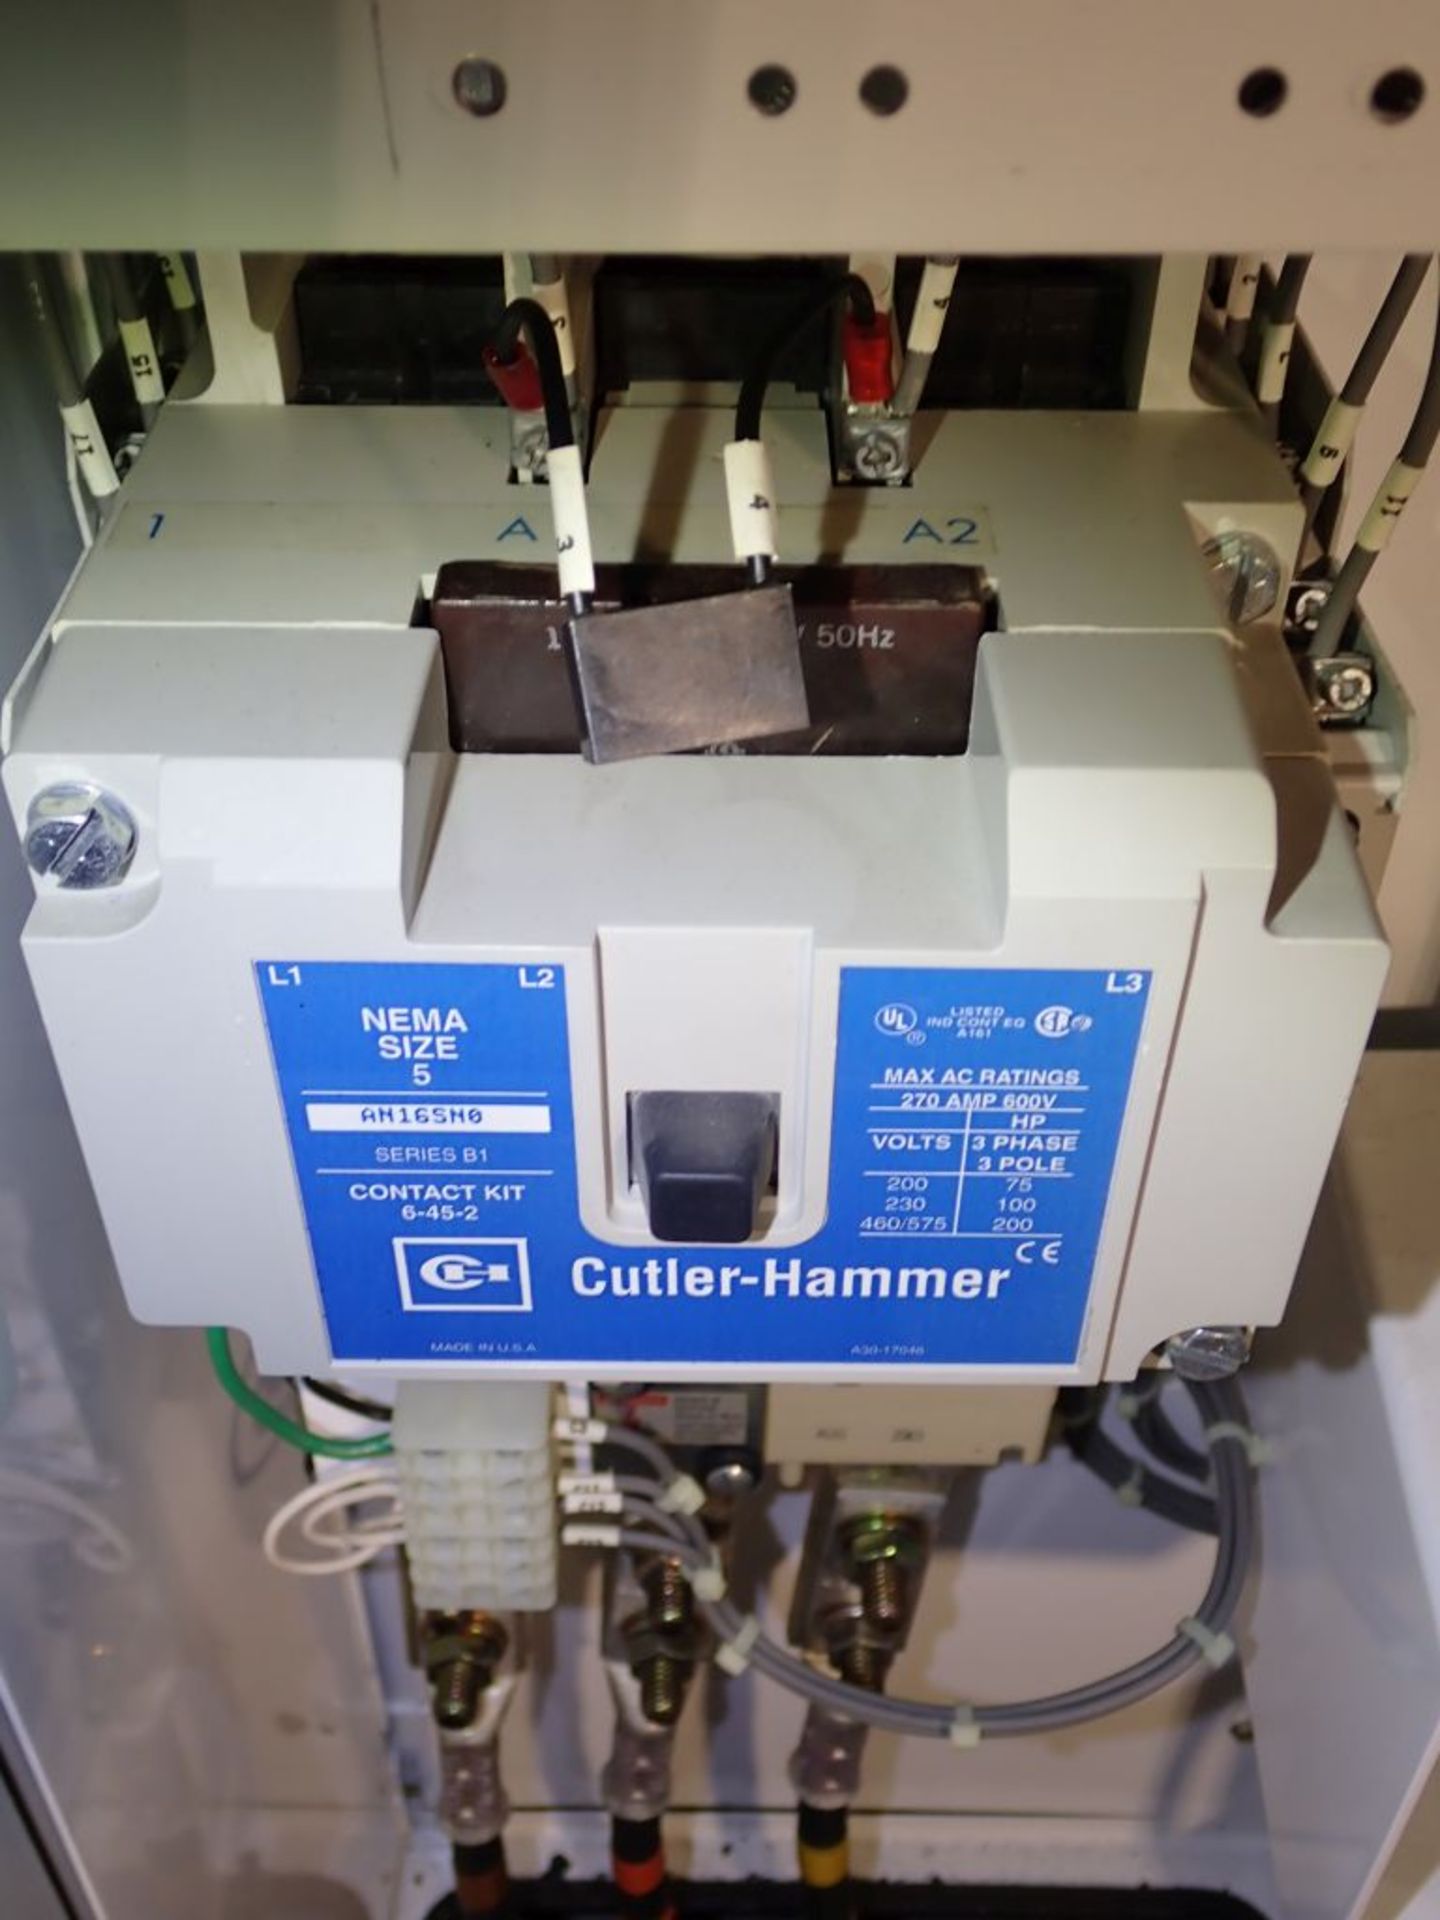 Cutler Hammer Freedom 2100 Series MCC | Lot Loading Fee: $500 | (7) Verticals - Sections 1-3 5-6 600 - Image 34 of 51